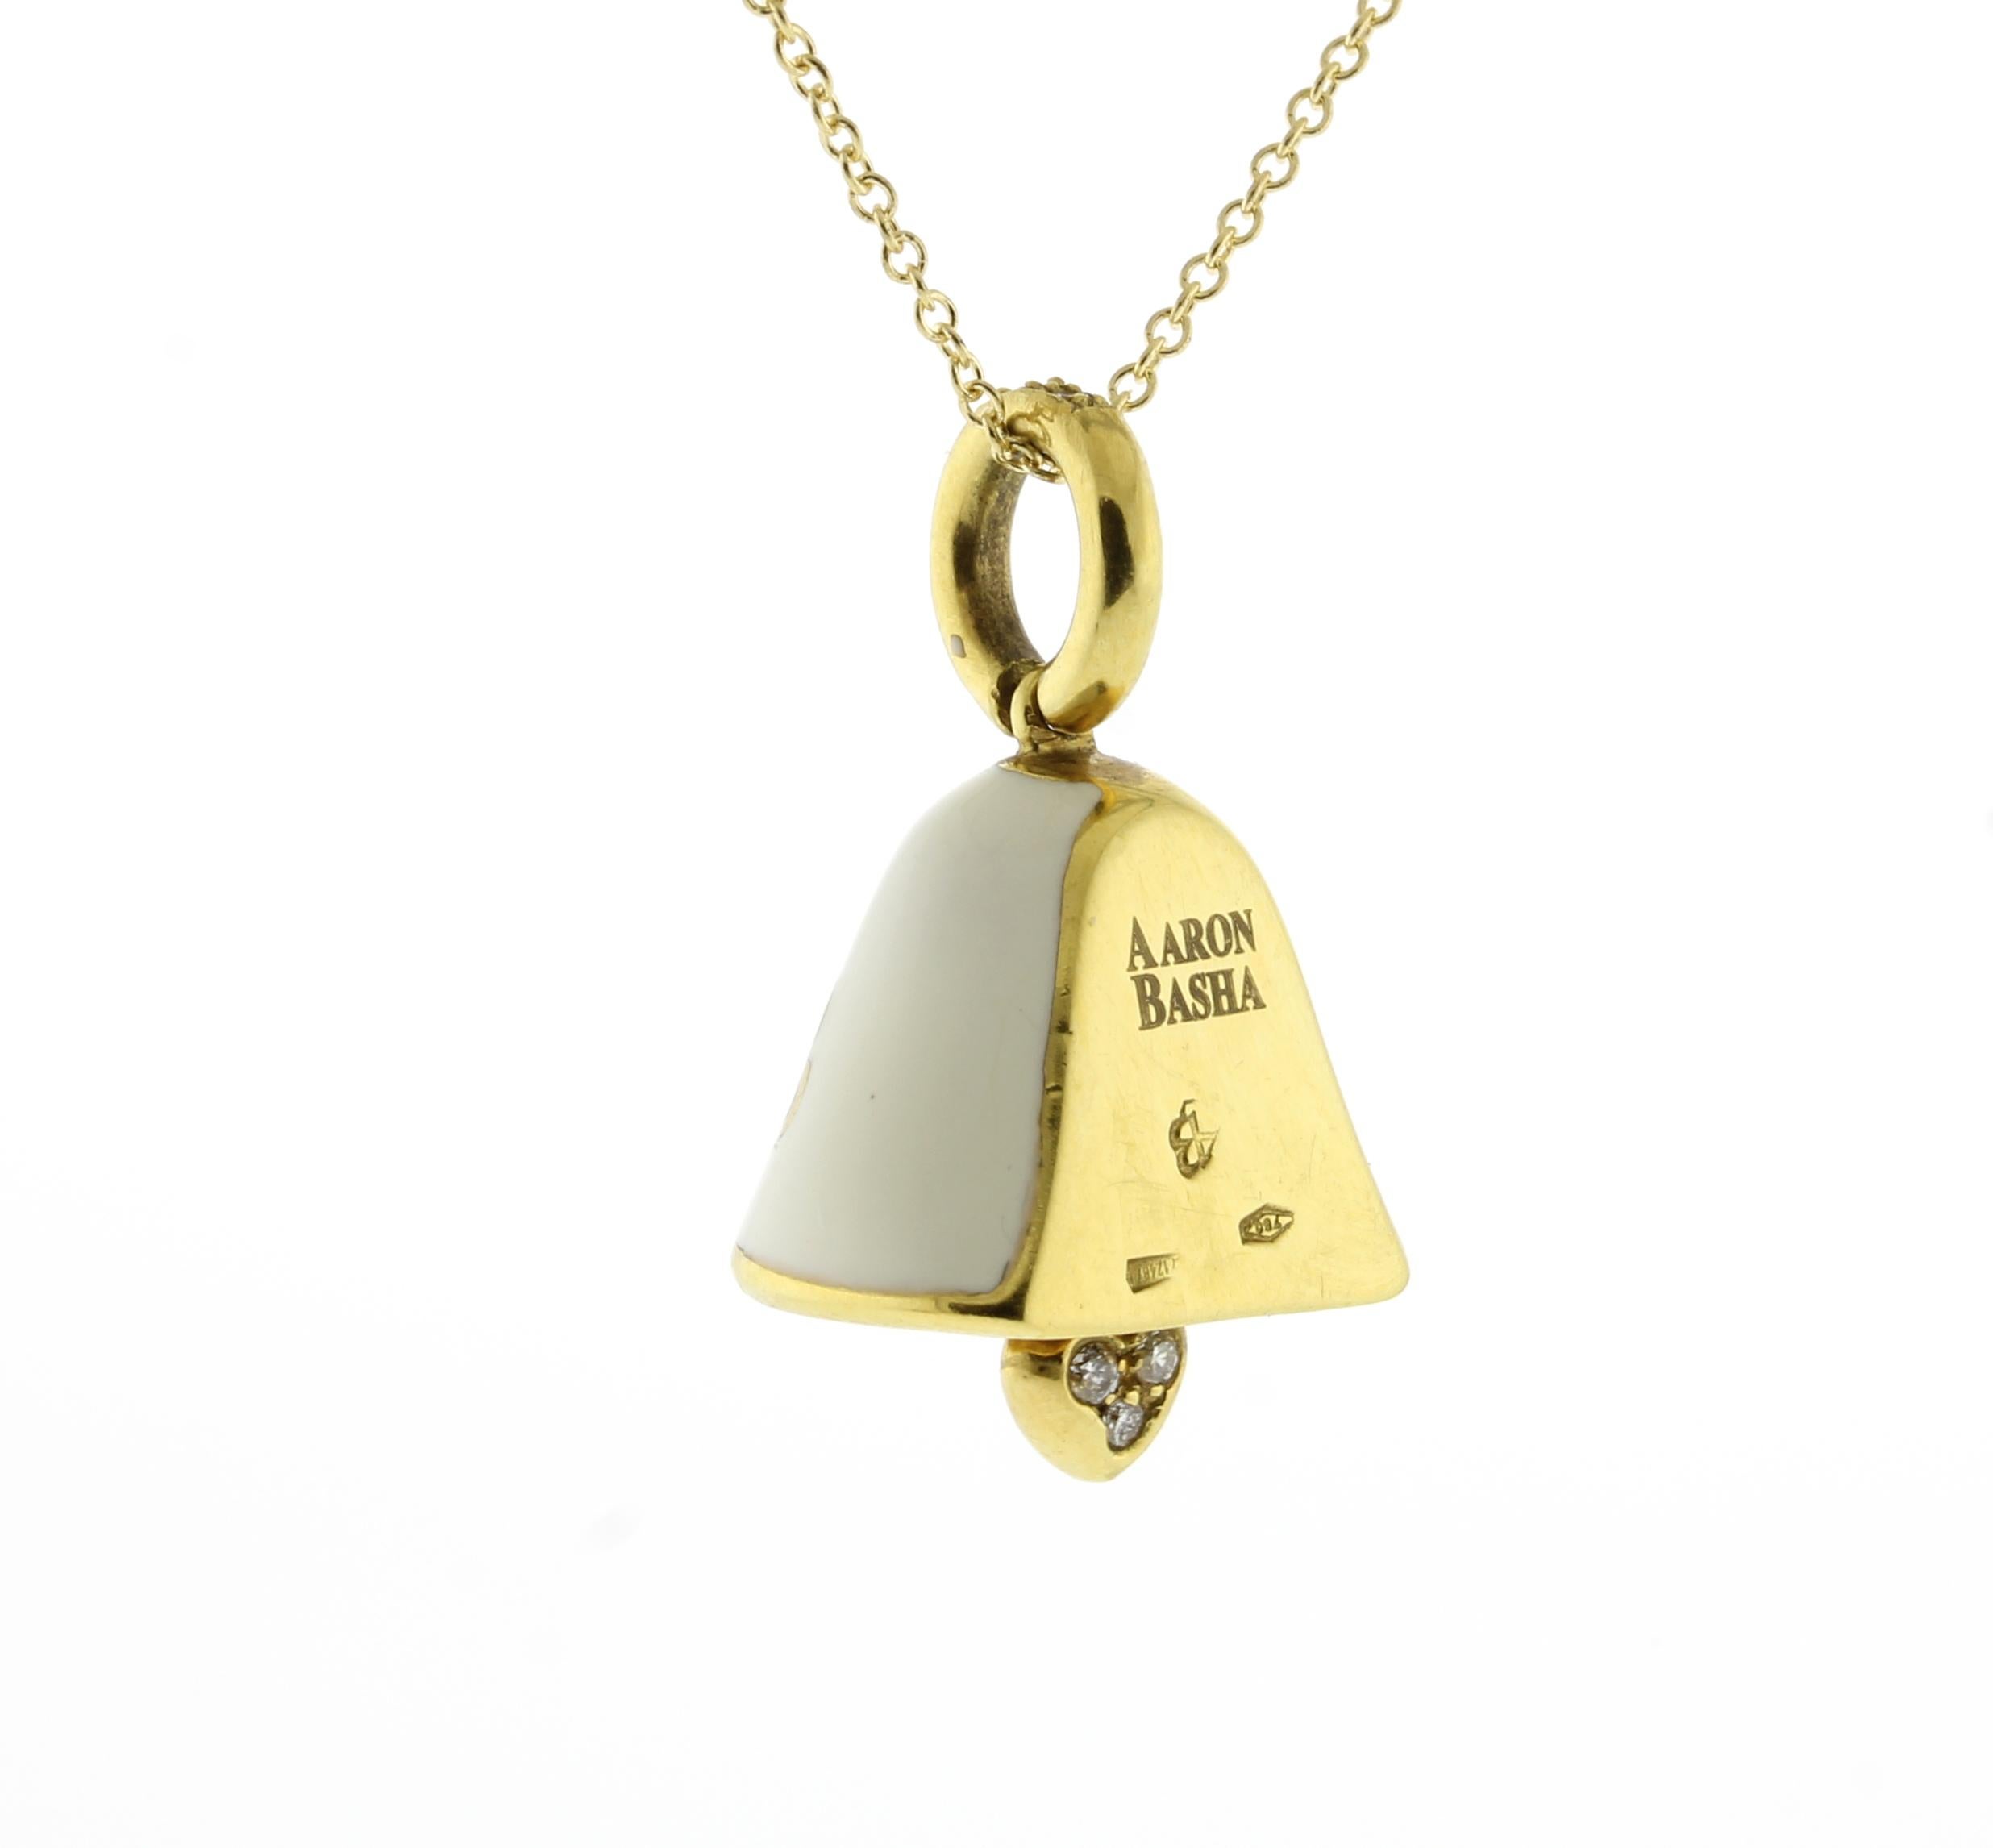 From Aaron Basha’s charm collection, a white with red hearts enamel bell.
• Designer: Aaron Basha	
• Metal: 18 karat gold
• Circa: Early 2000s
• Size: 1 inch high, 16 inch gold chain 
• Packaging: Pampillonia presentation box
• Condition: Excellent
